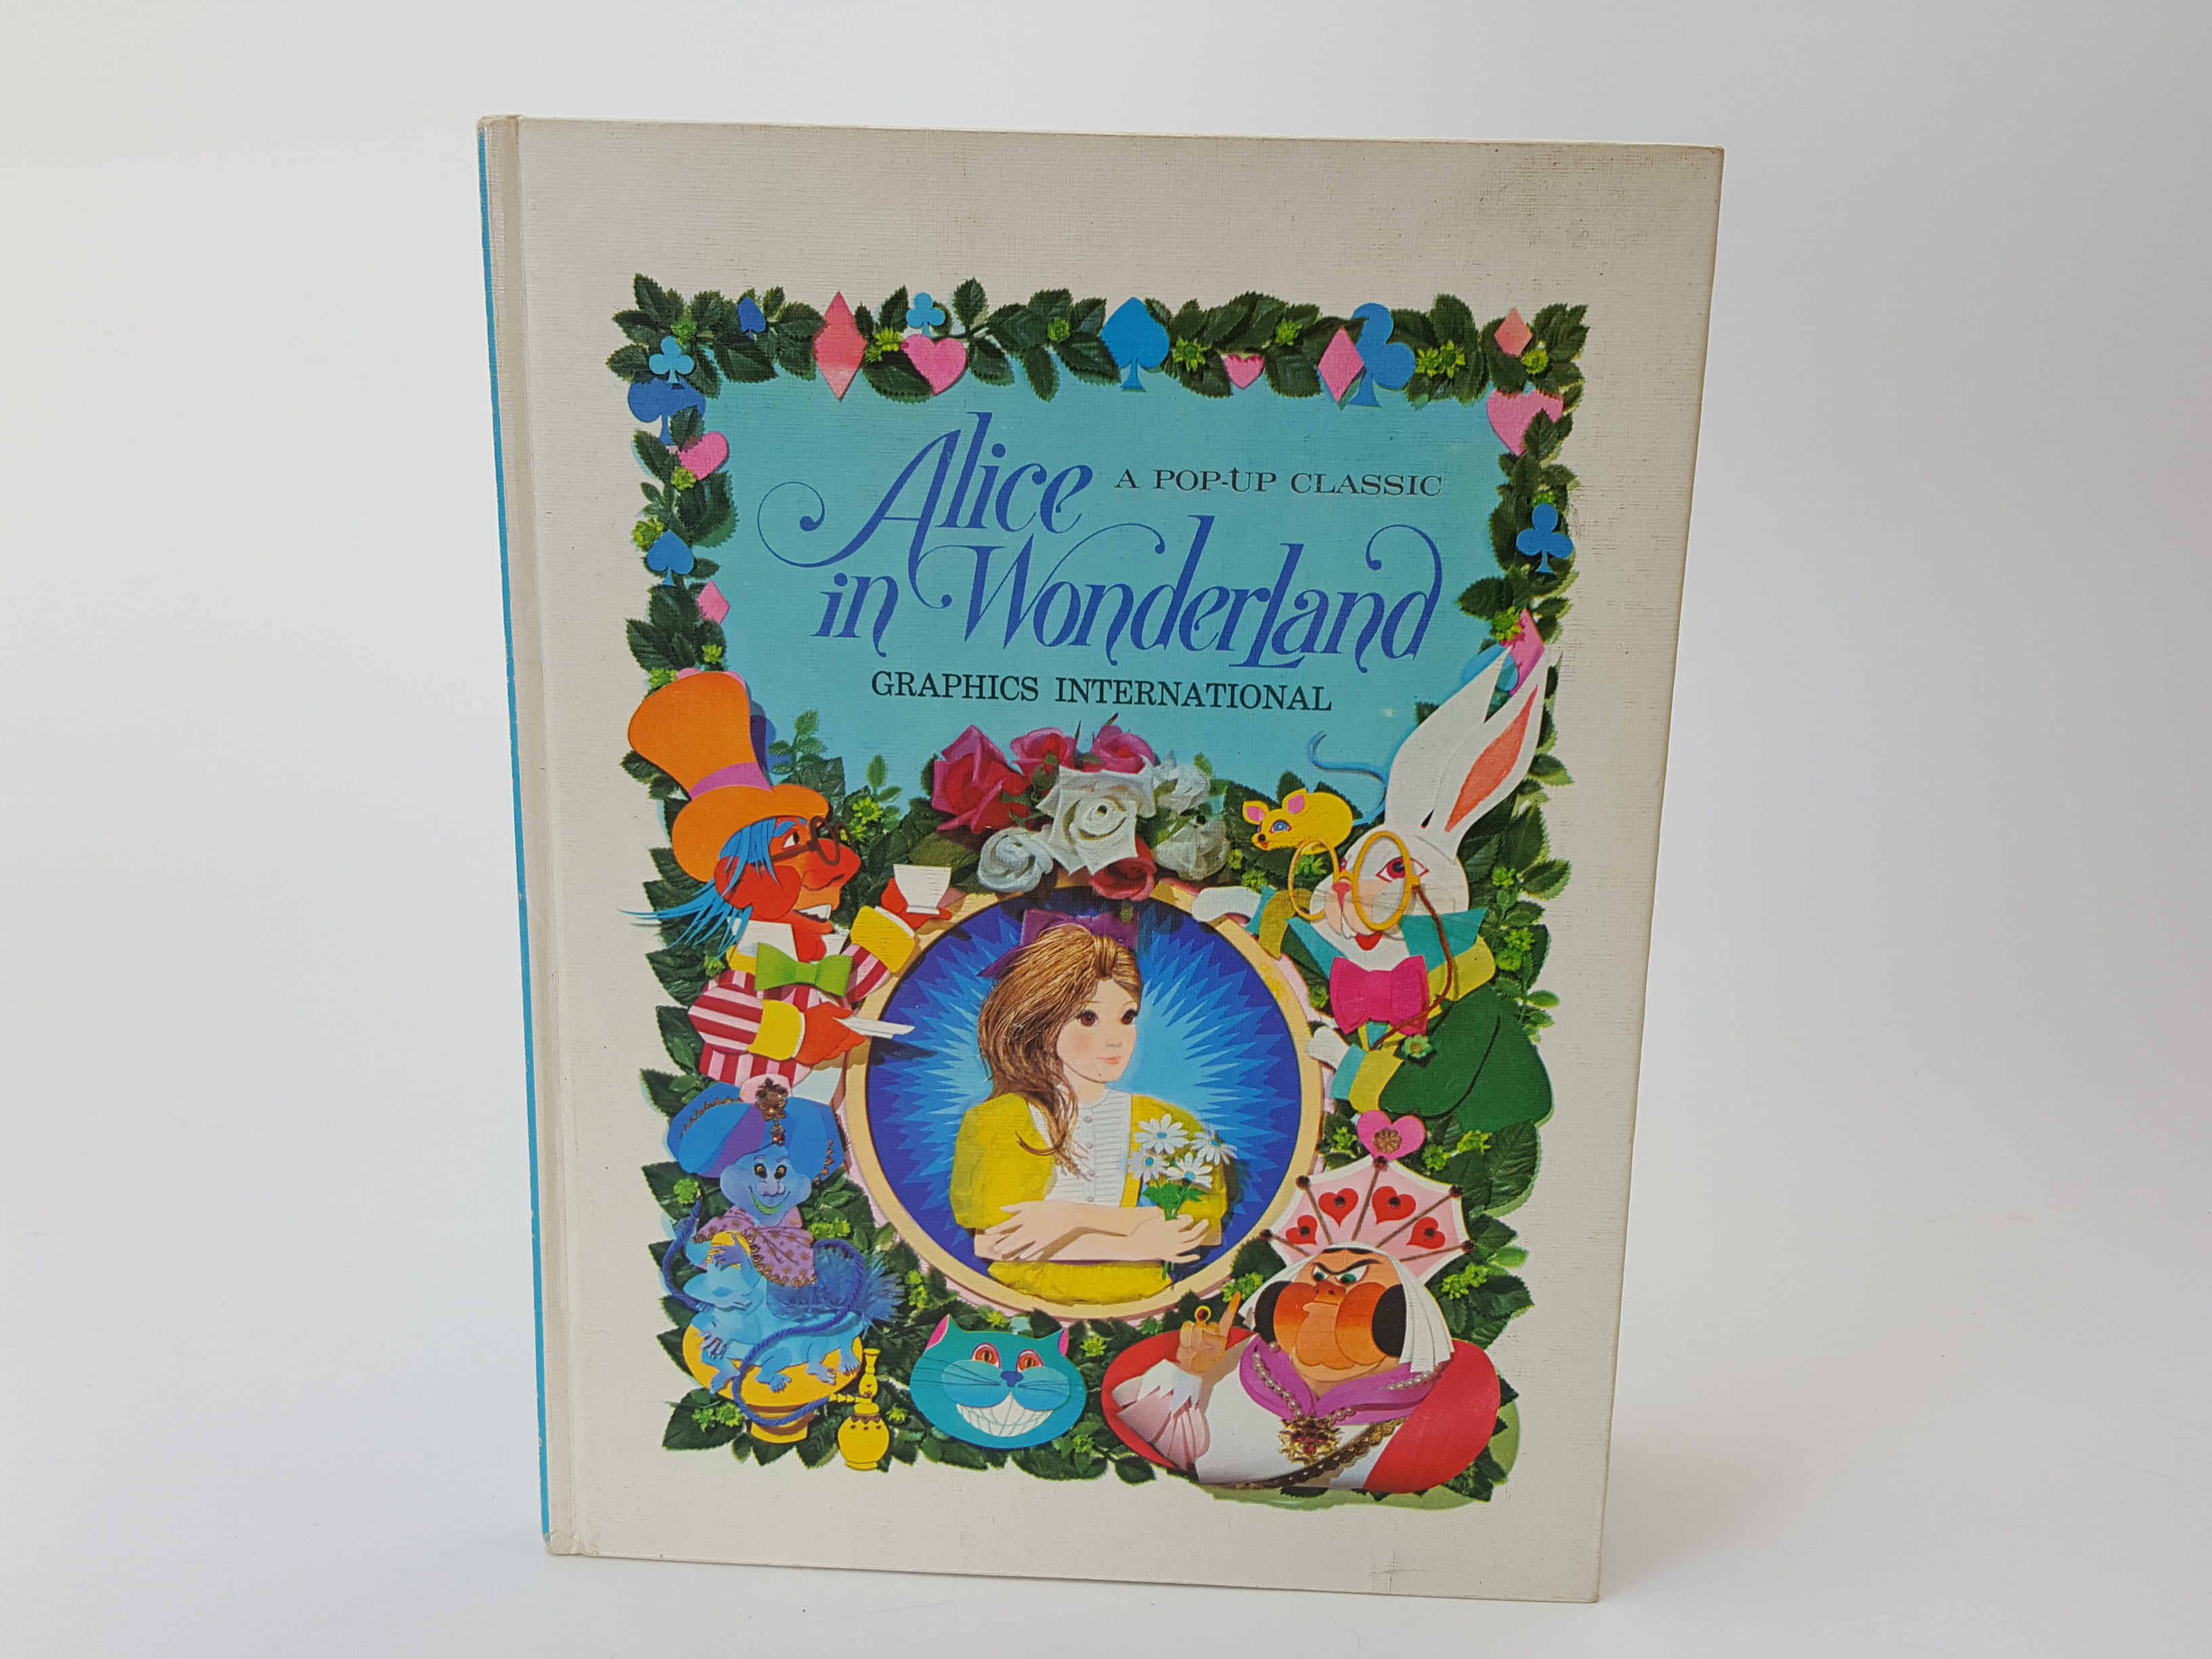 Alice in Wonderland, a Pop-up Classic by Carroll, Lewis